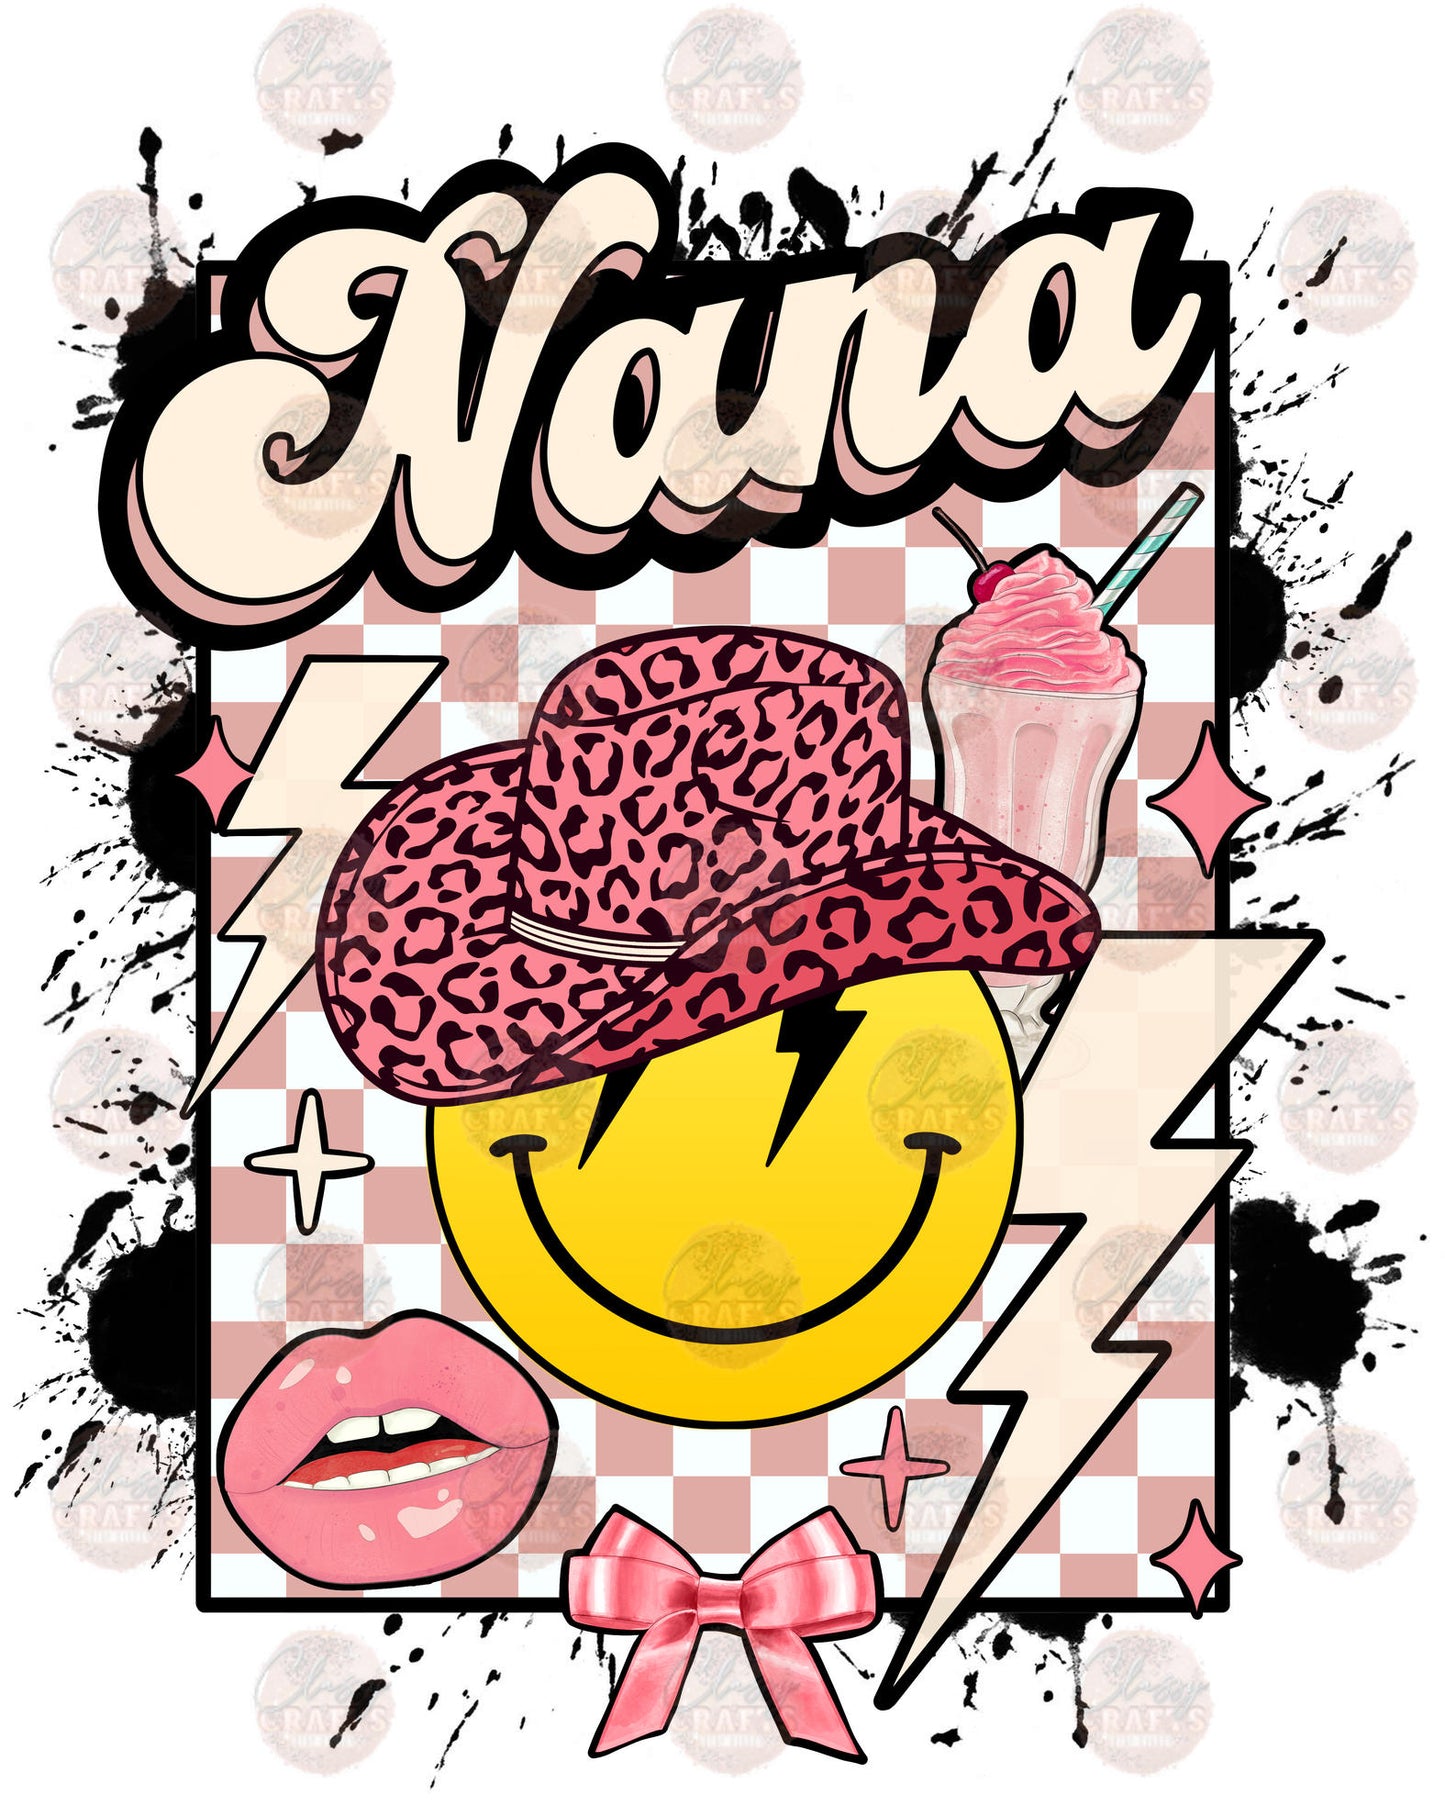 Cowgirl Nana Smiley - Sublimation Transfer